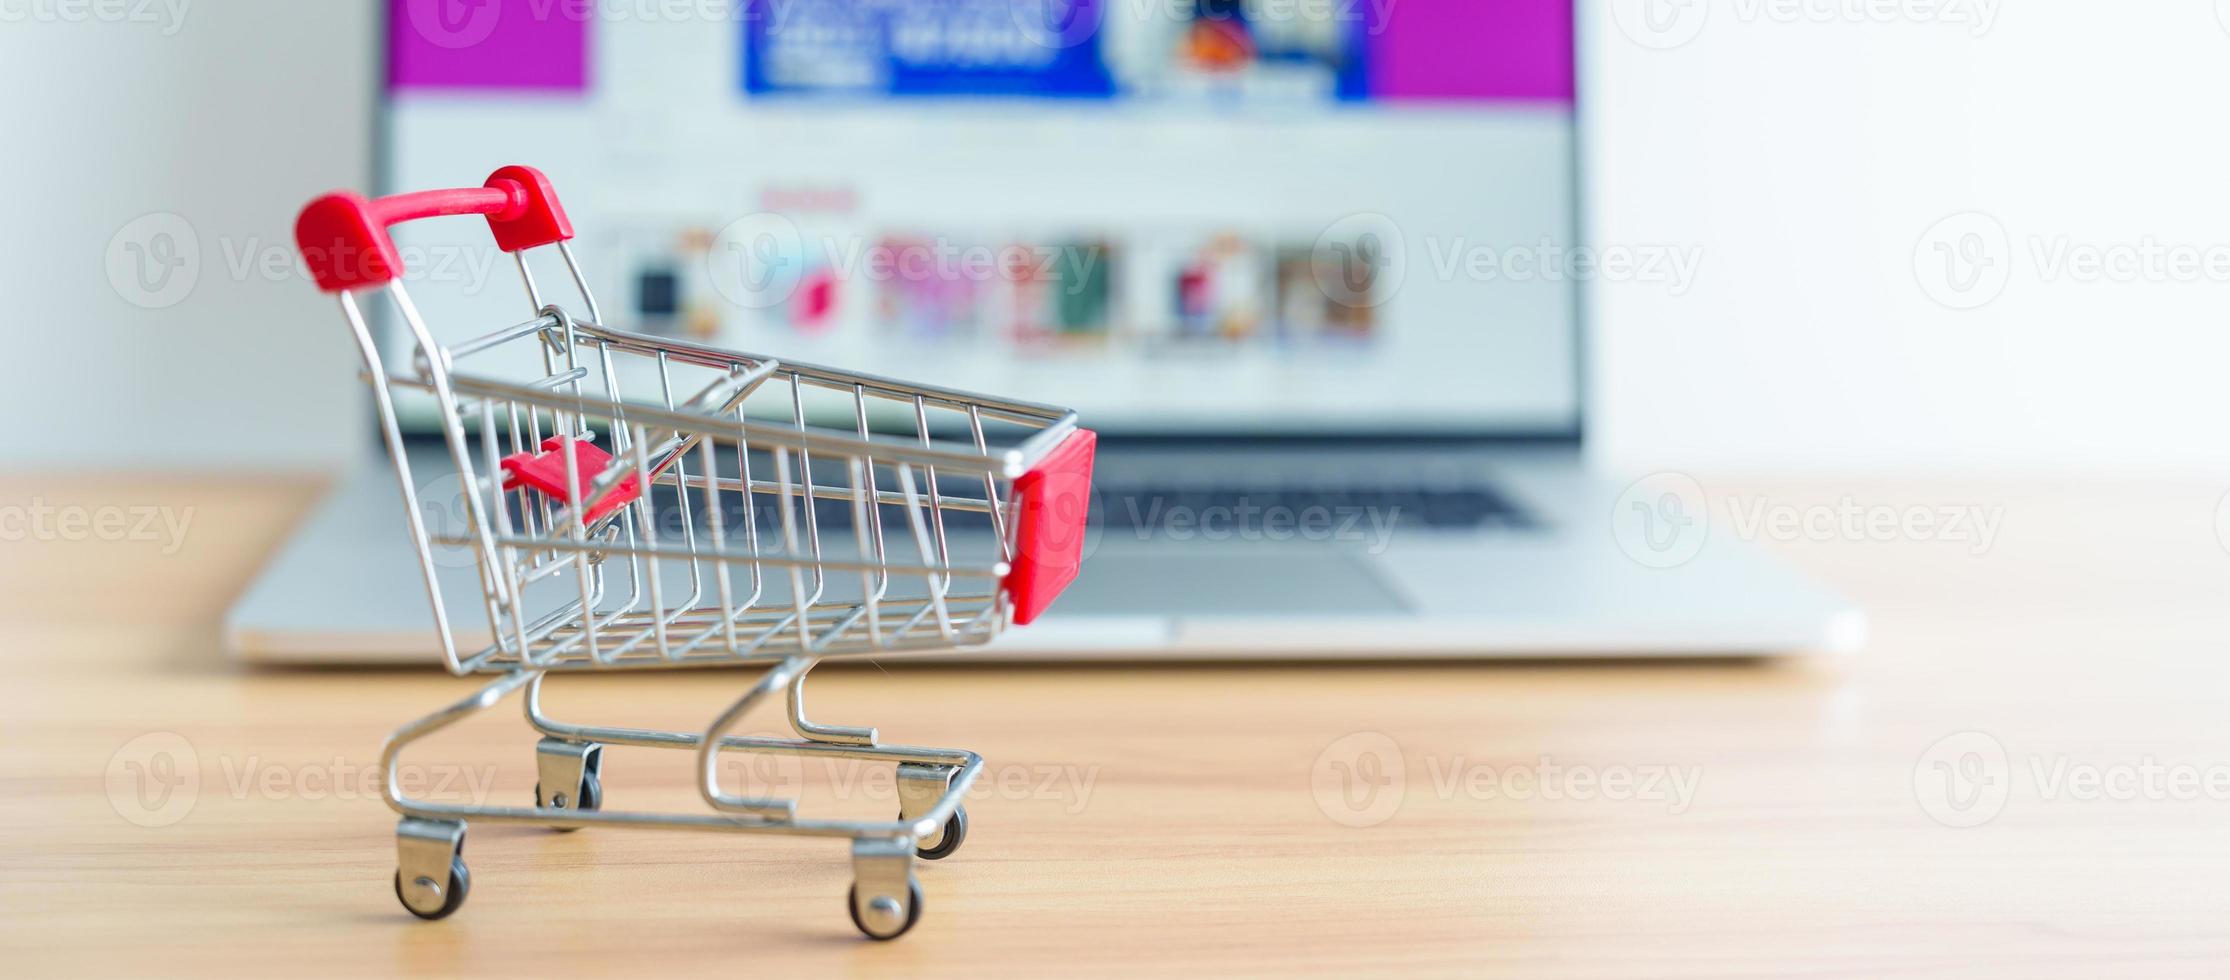 Shopping cart and laptop computer with marketplace website. business, technology, ecommerce, digital banking and online payment concept photo